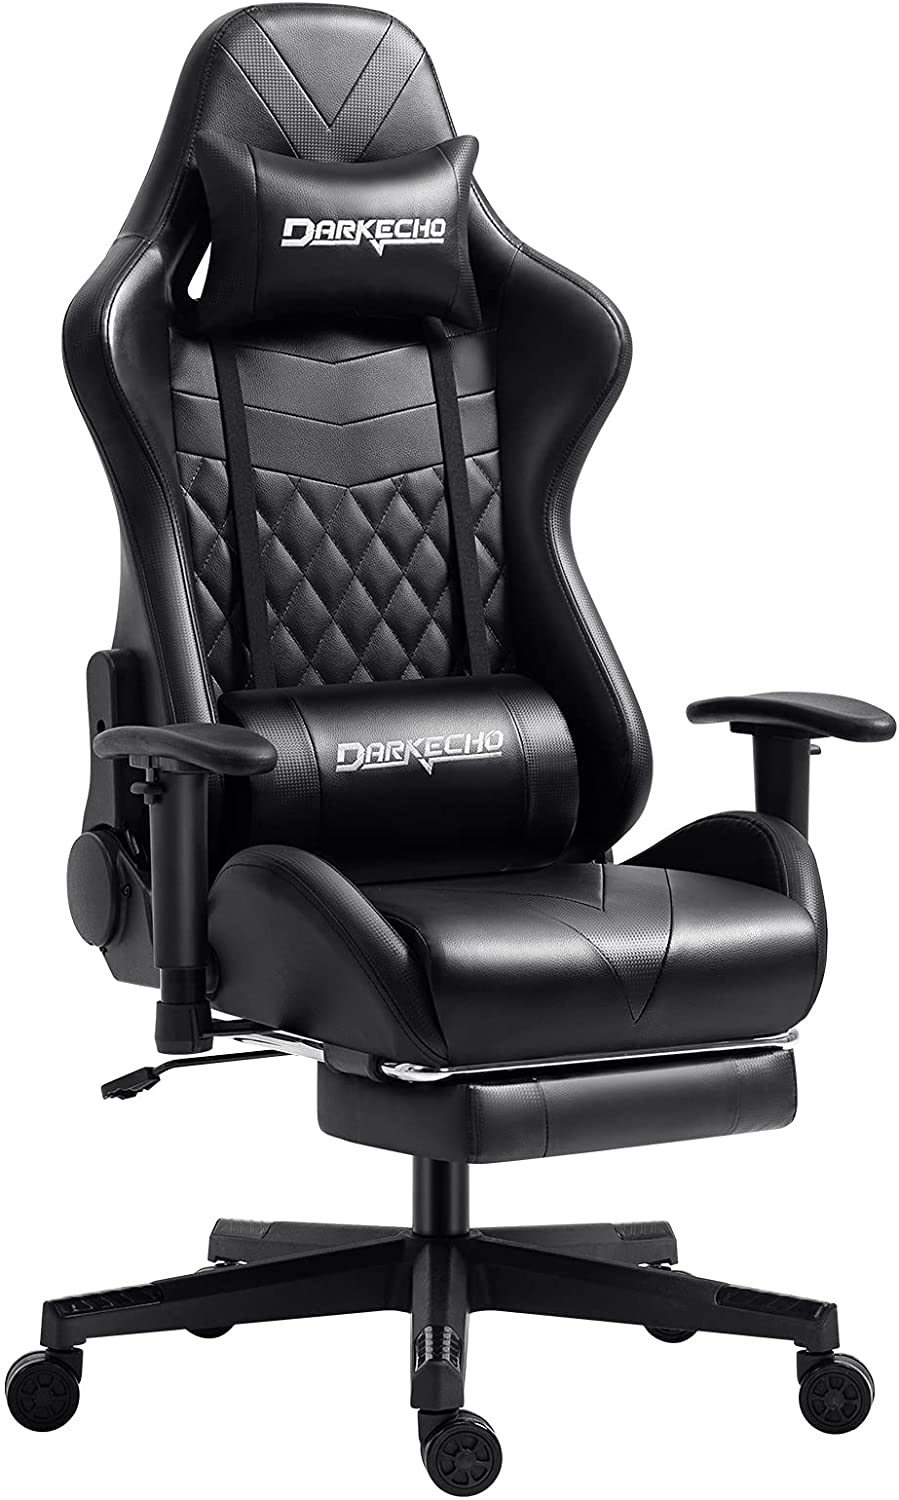 Darkecho Gaming And Office Chair